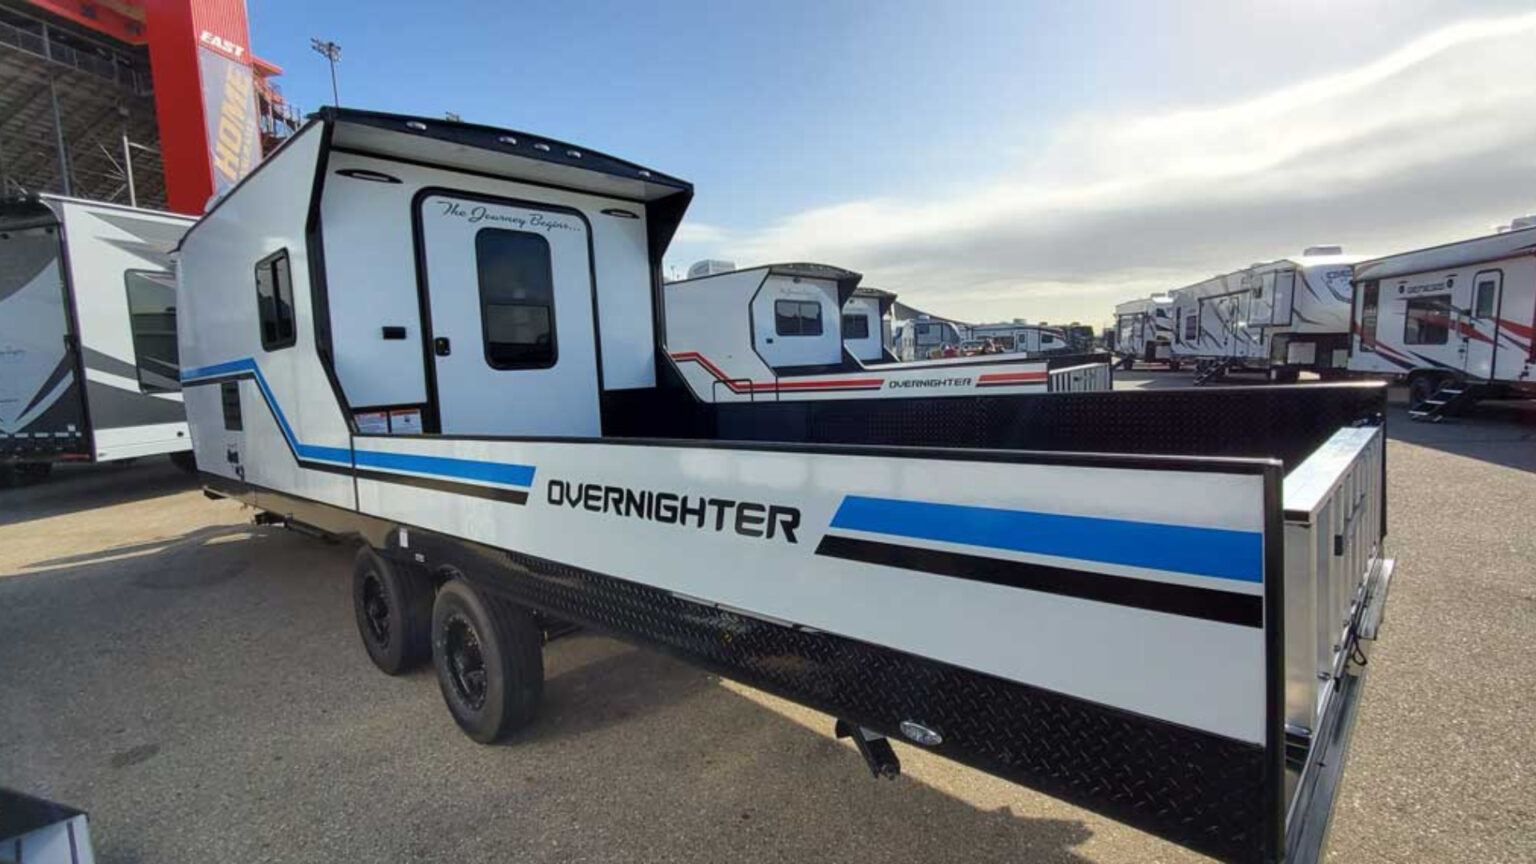 The Overnighter Is The Most Unique Toy Hauler Weve Ever Seen Getaway